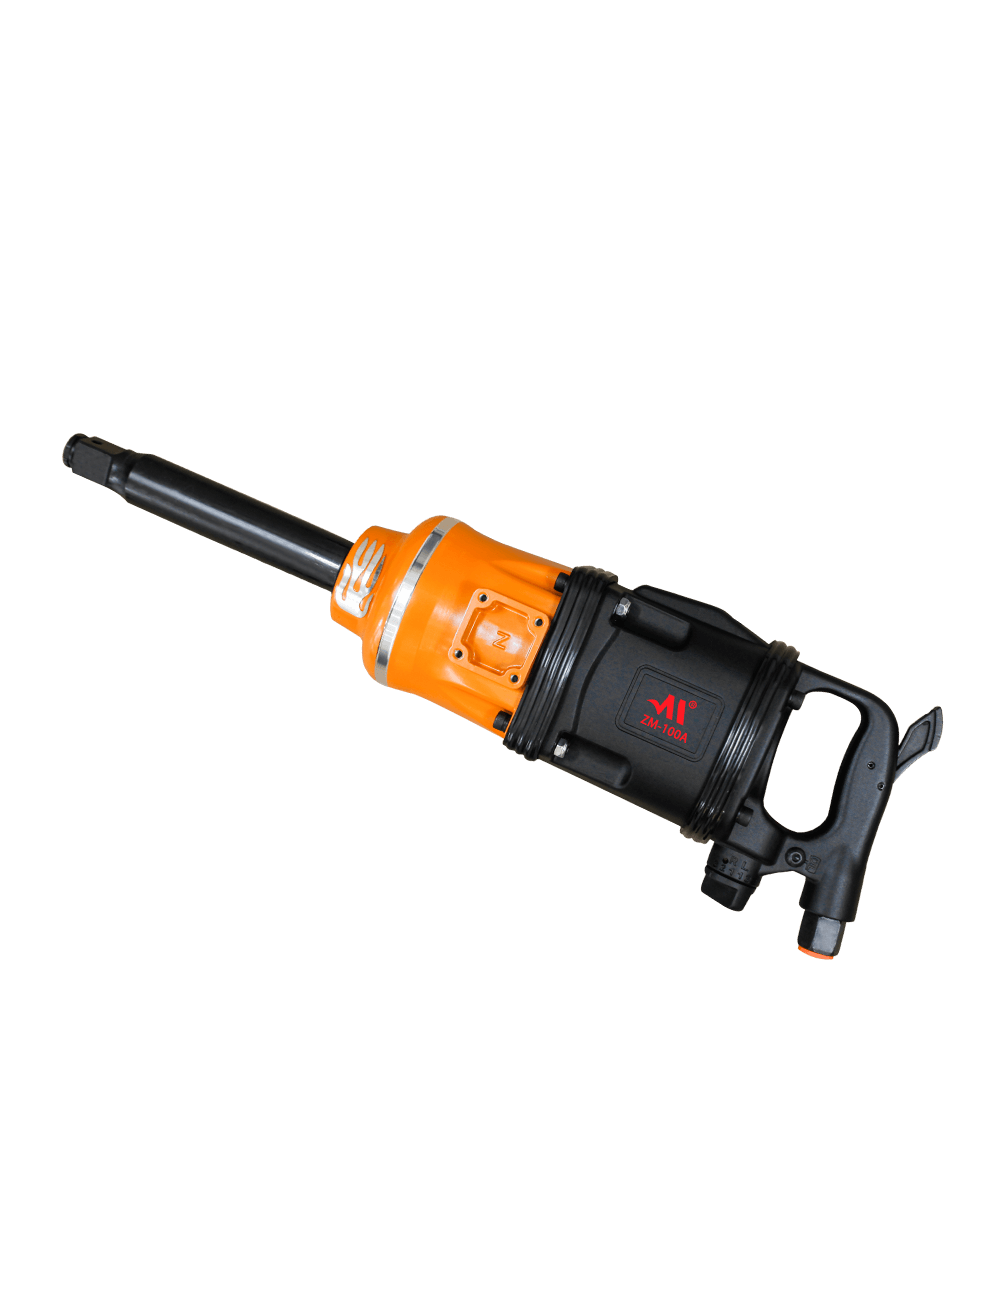 Revolutionary High-Pressure Cleaner Unveiled